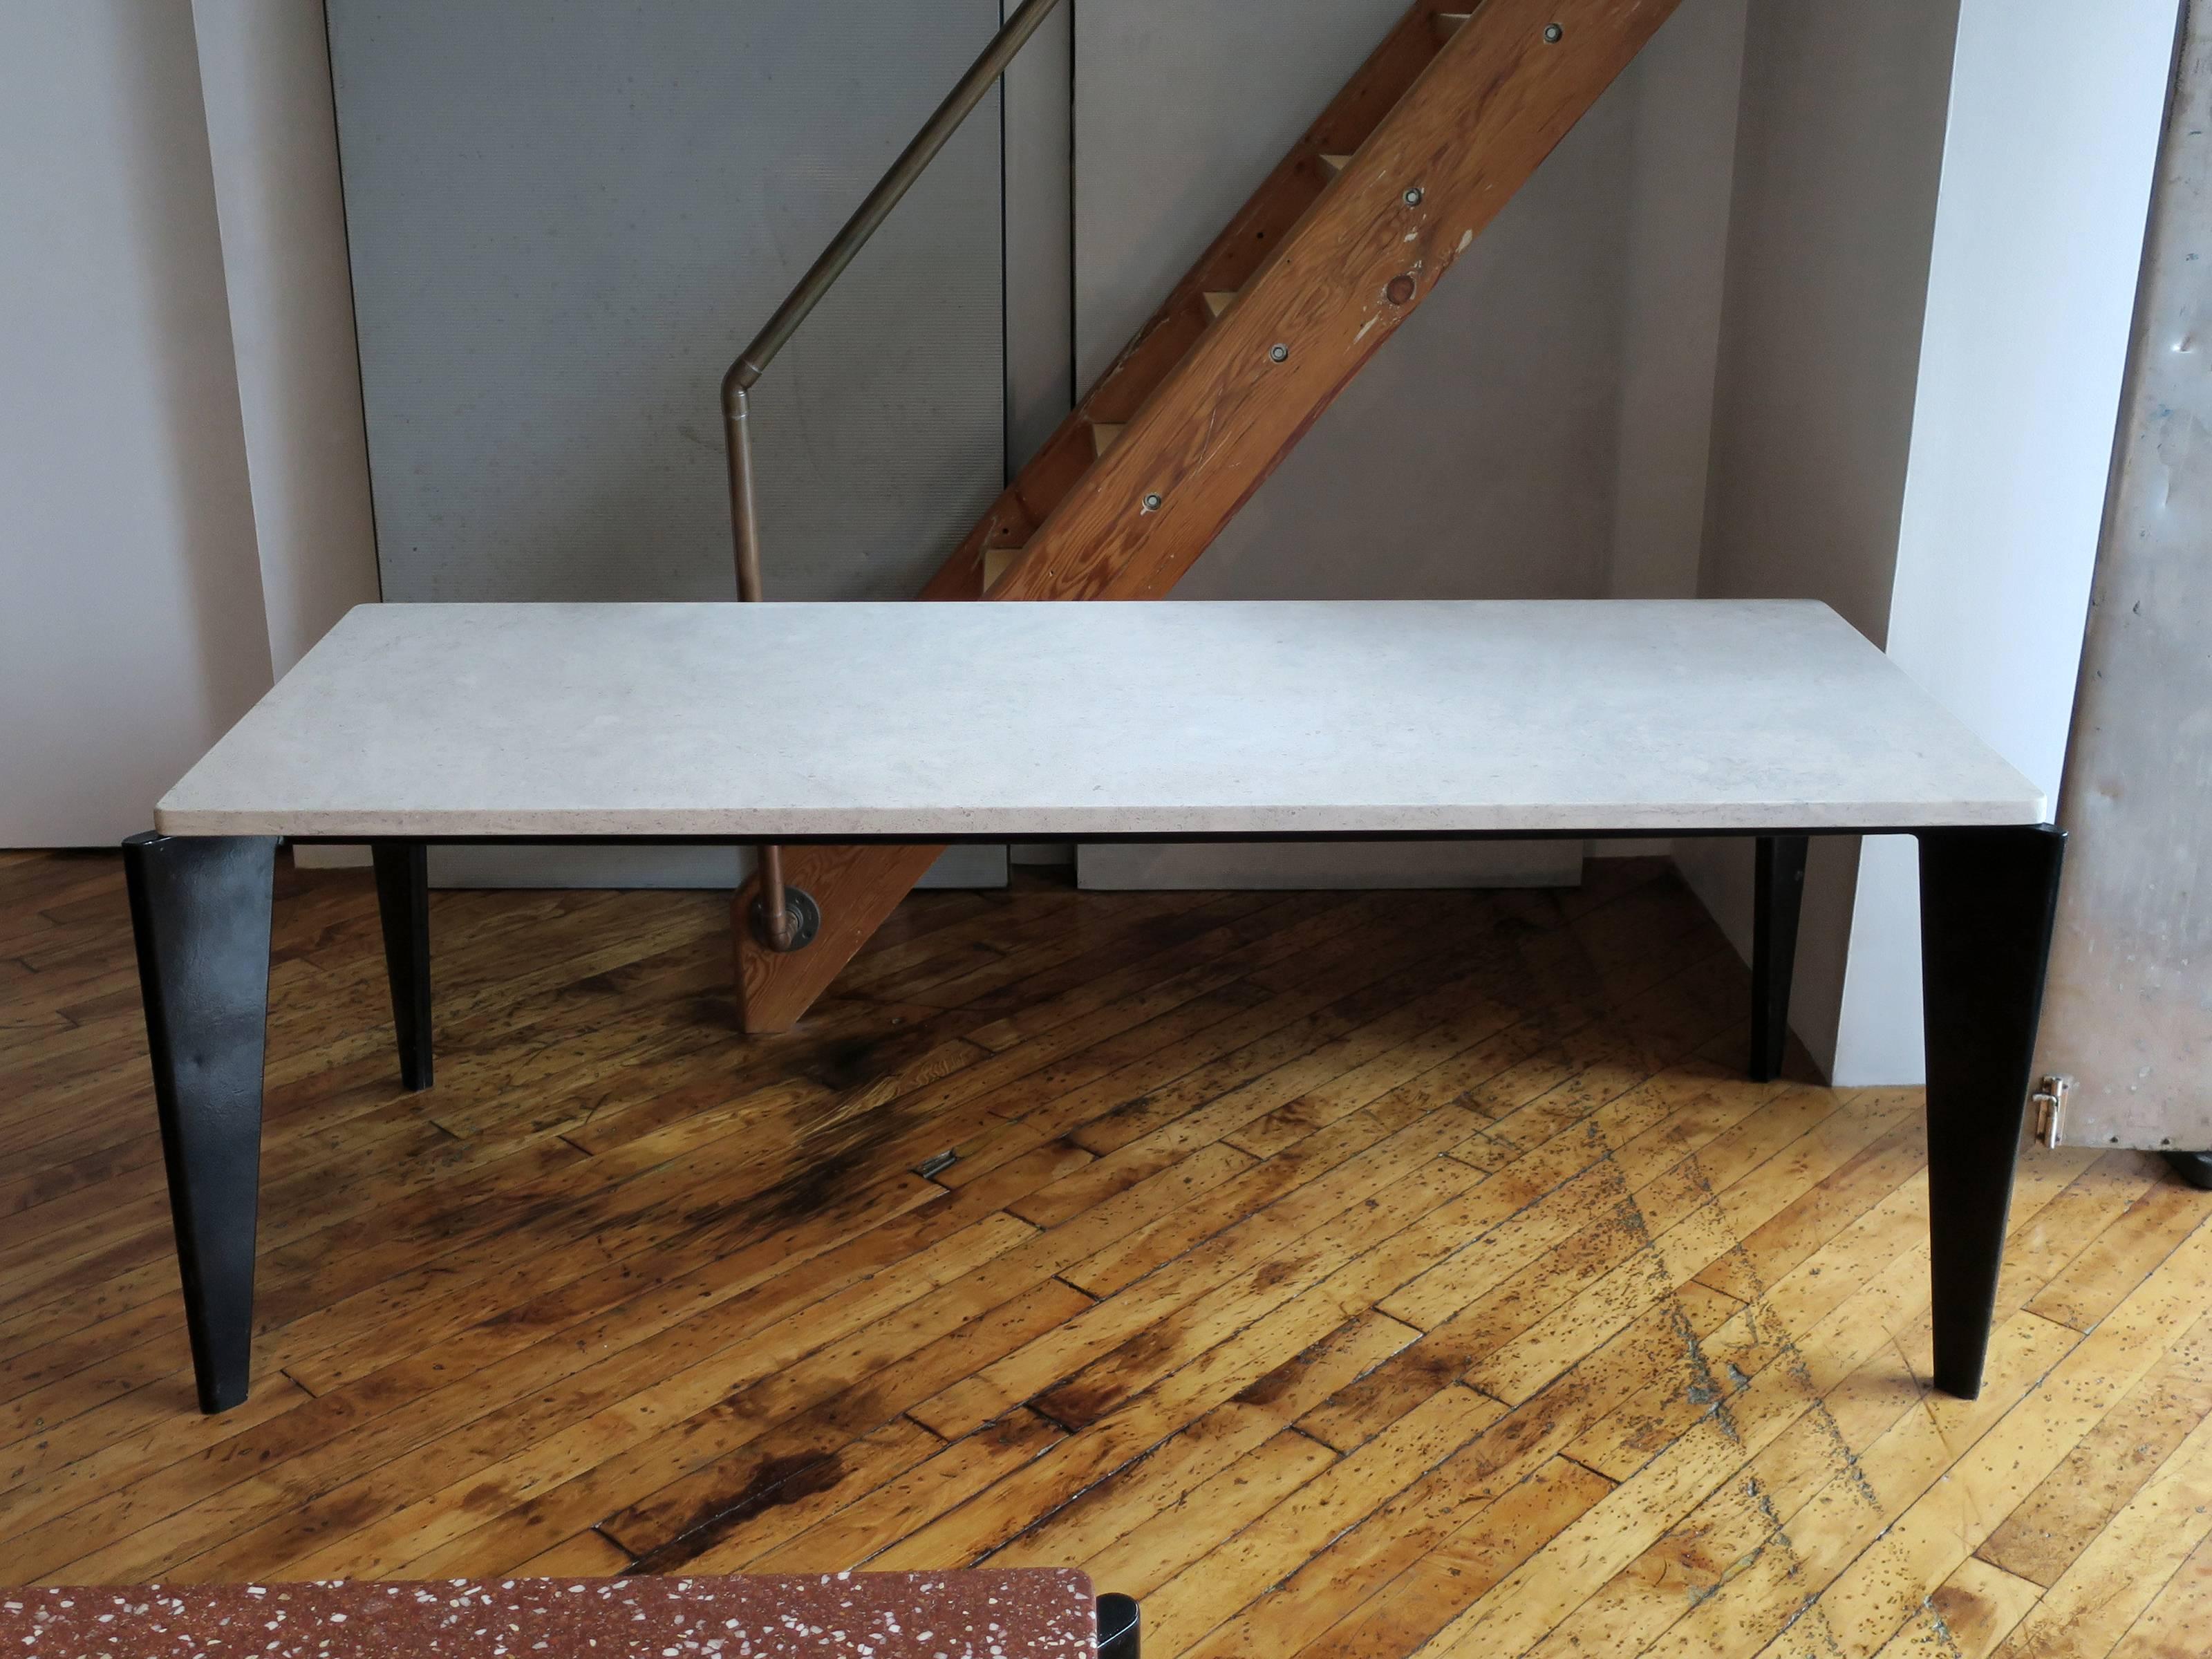 A rare, early Flavigny dining table designed by Jean Prouvé, manufactured by Ateliers Jean Prouvé, circa 1945. Bent sheet metal frame with limestone top. Top is a later replacement which is very common of this early table. 

Note from the Jean